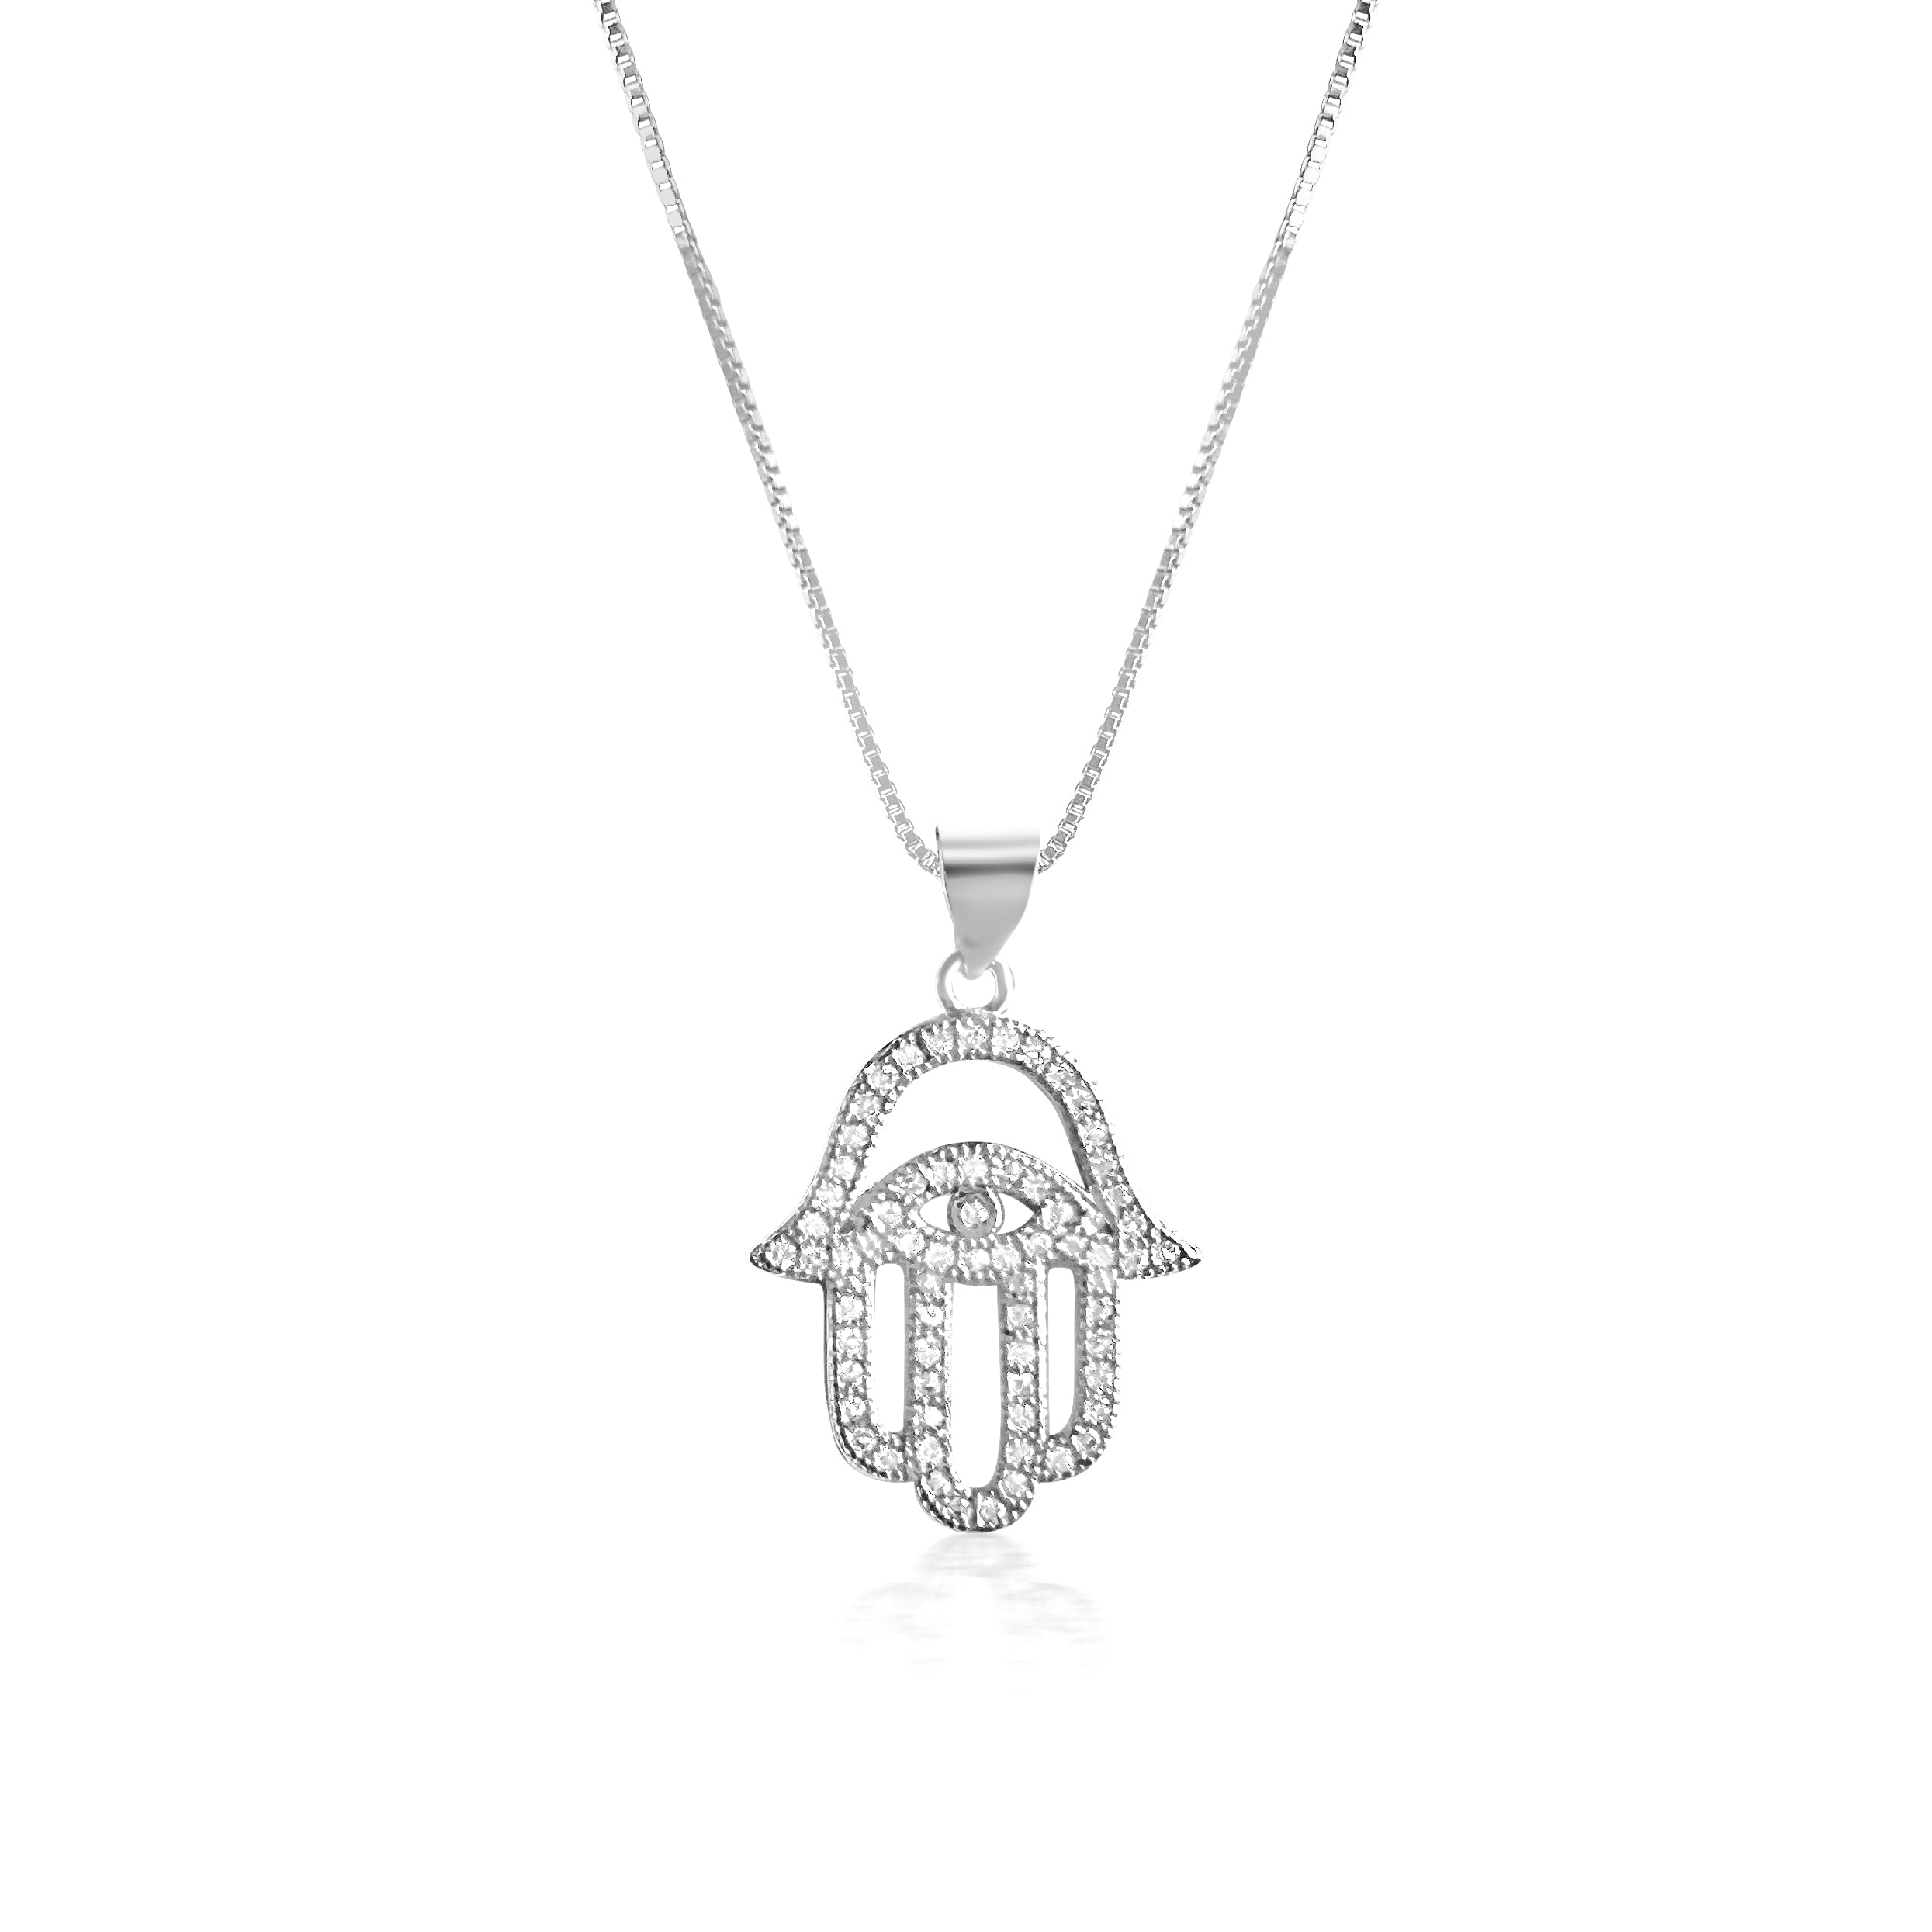 Held in Wisdom Hamsa Hand Necklace - Gold Filled